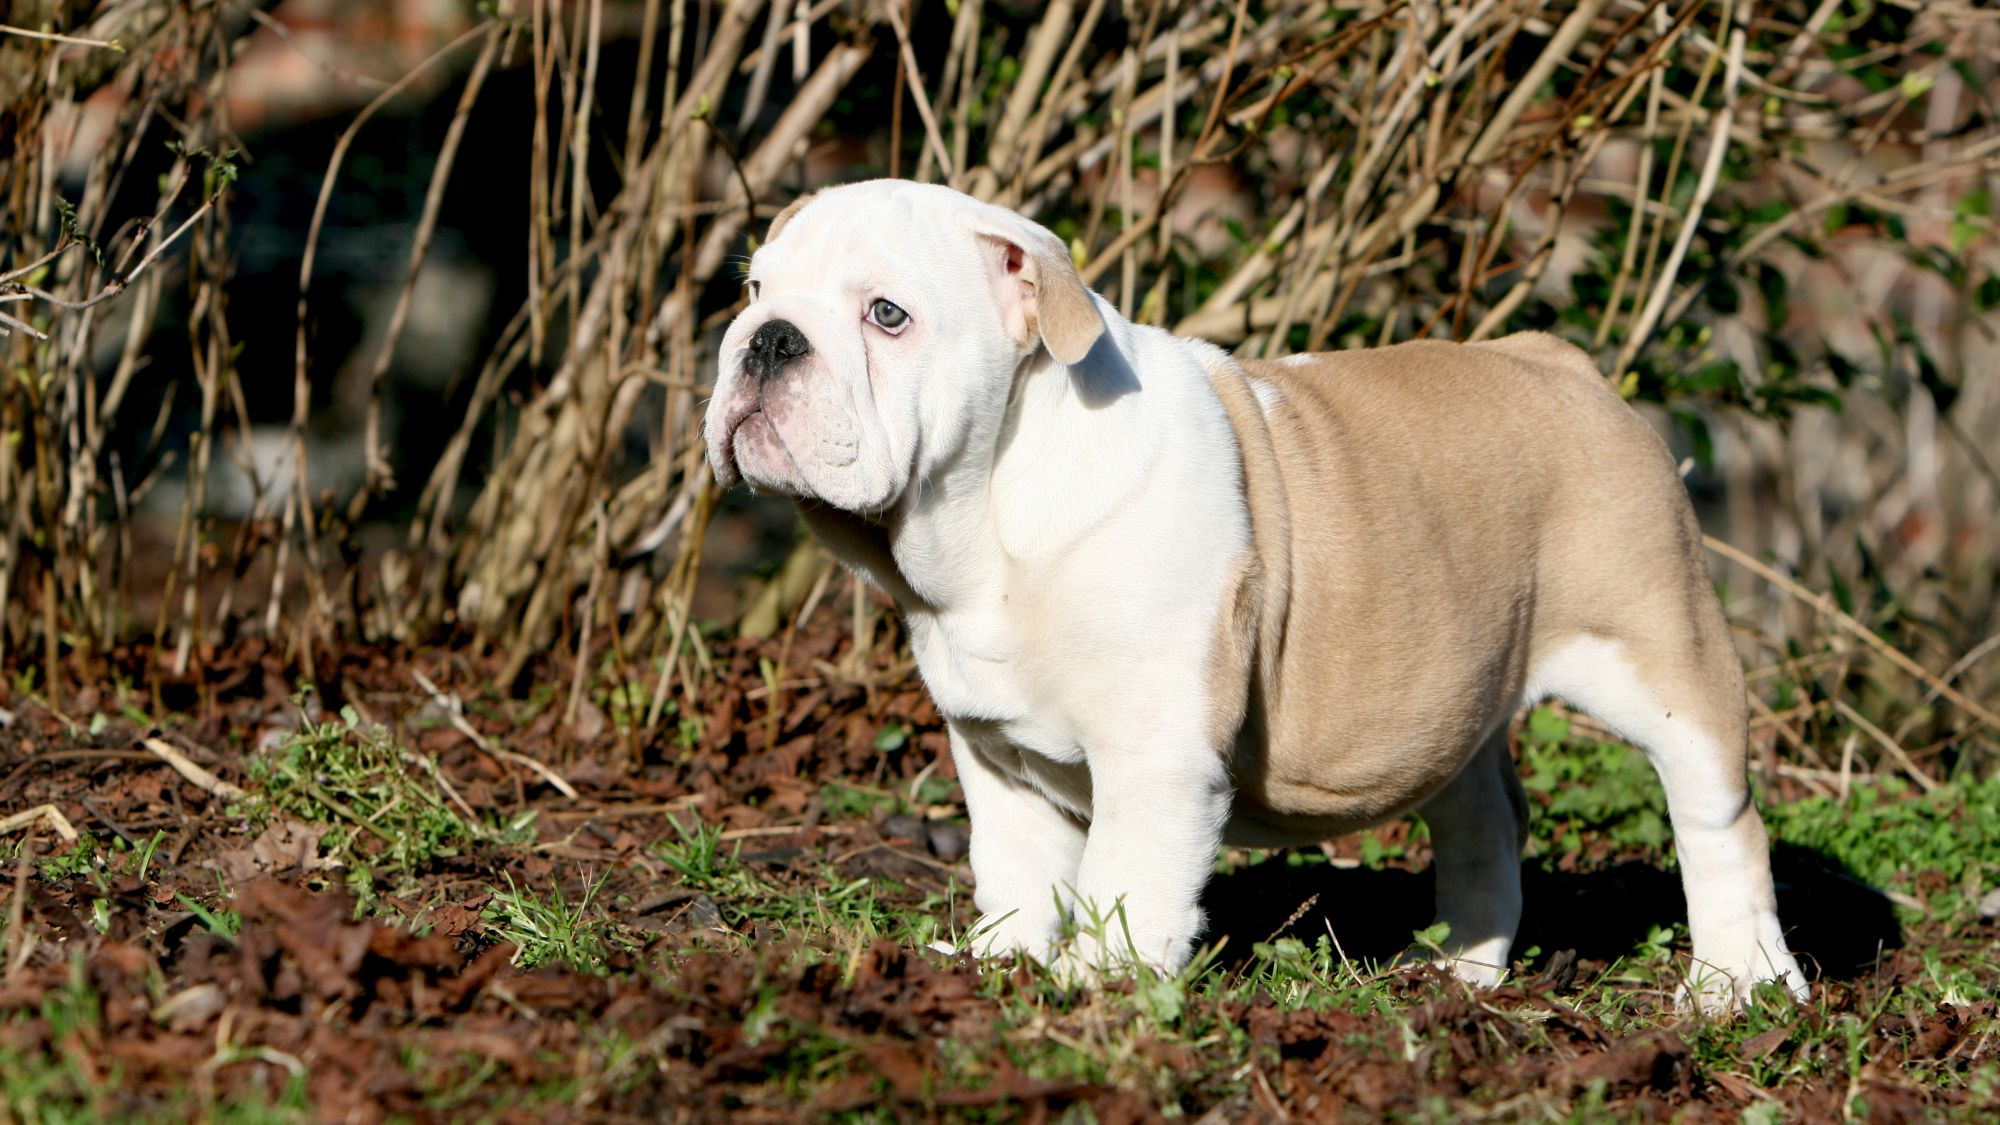 Bulldog puppy standing in front of reeds